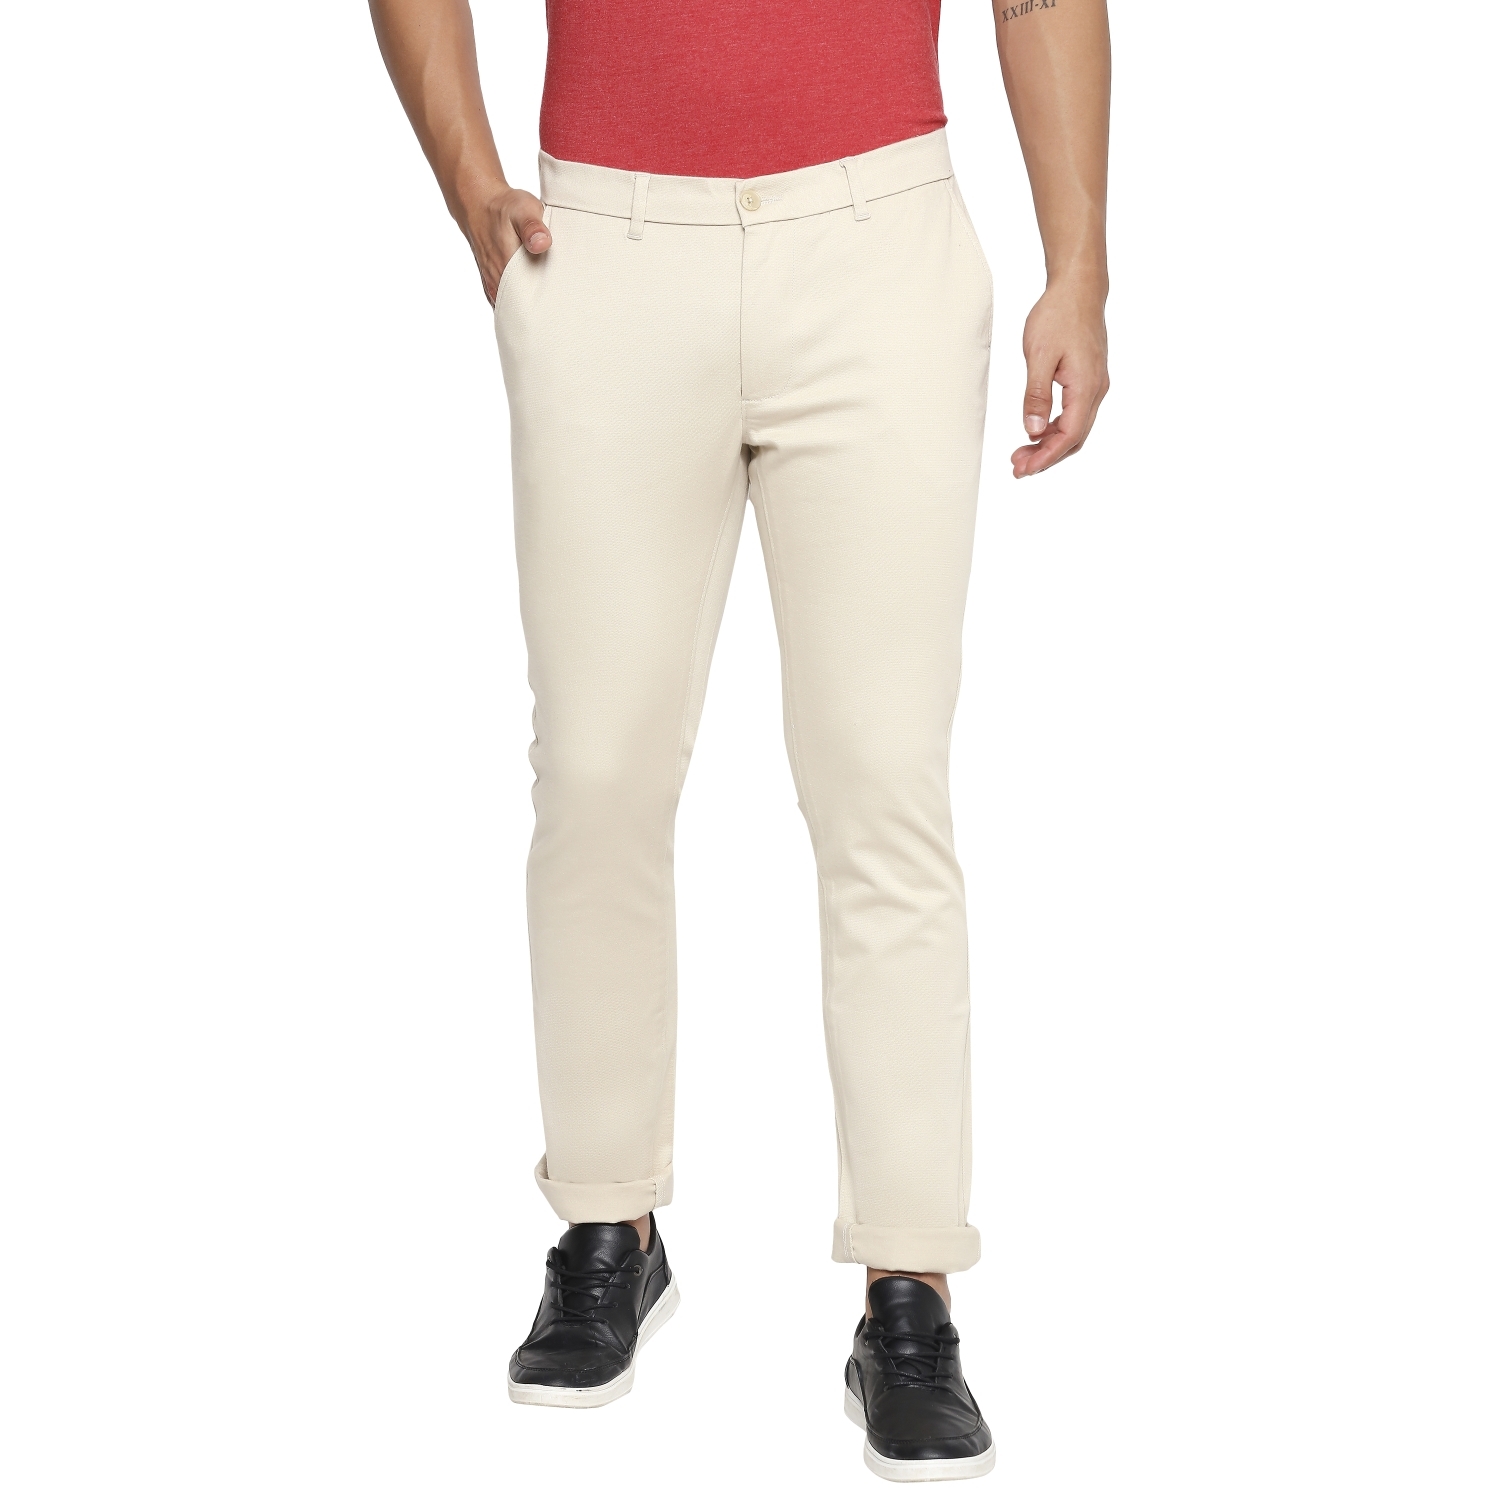 Basics | Basics Tapered Fit Parchment Stone Stretch Trouser